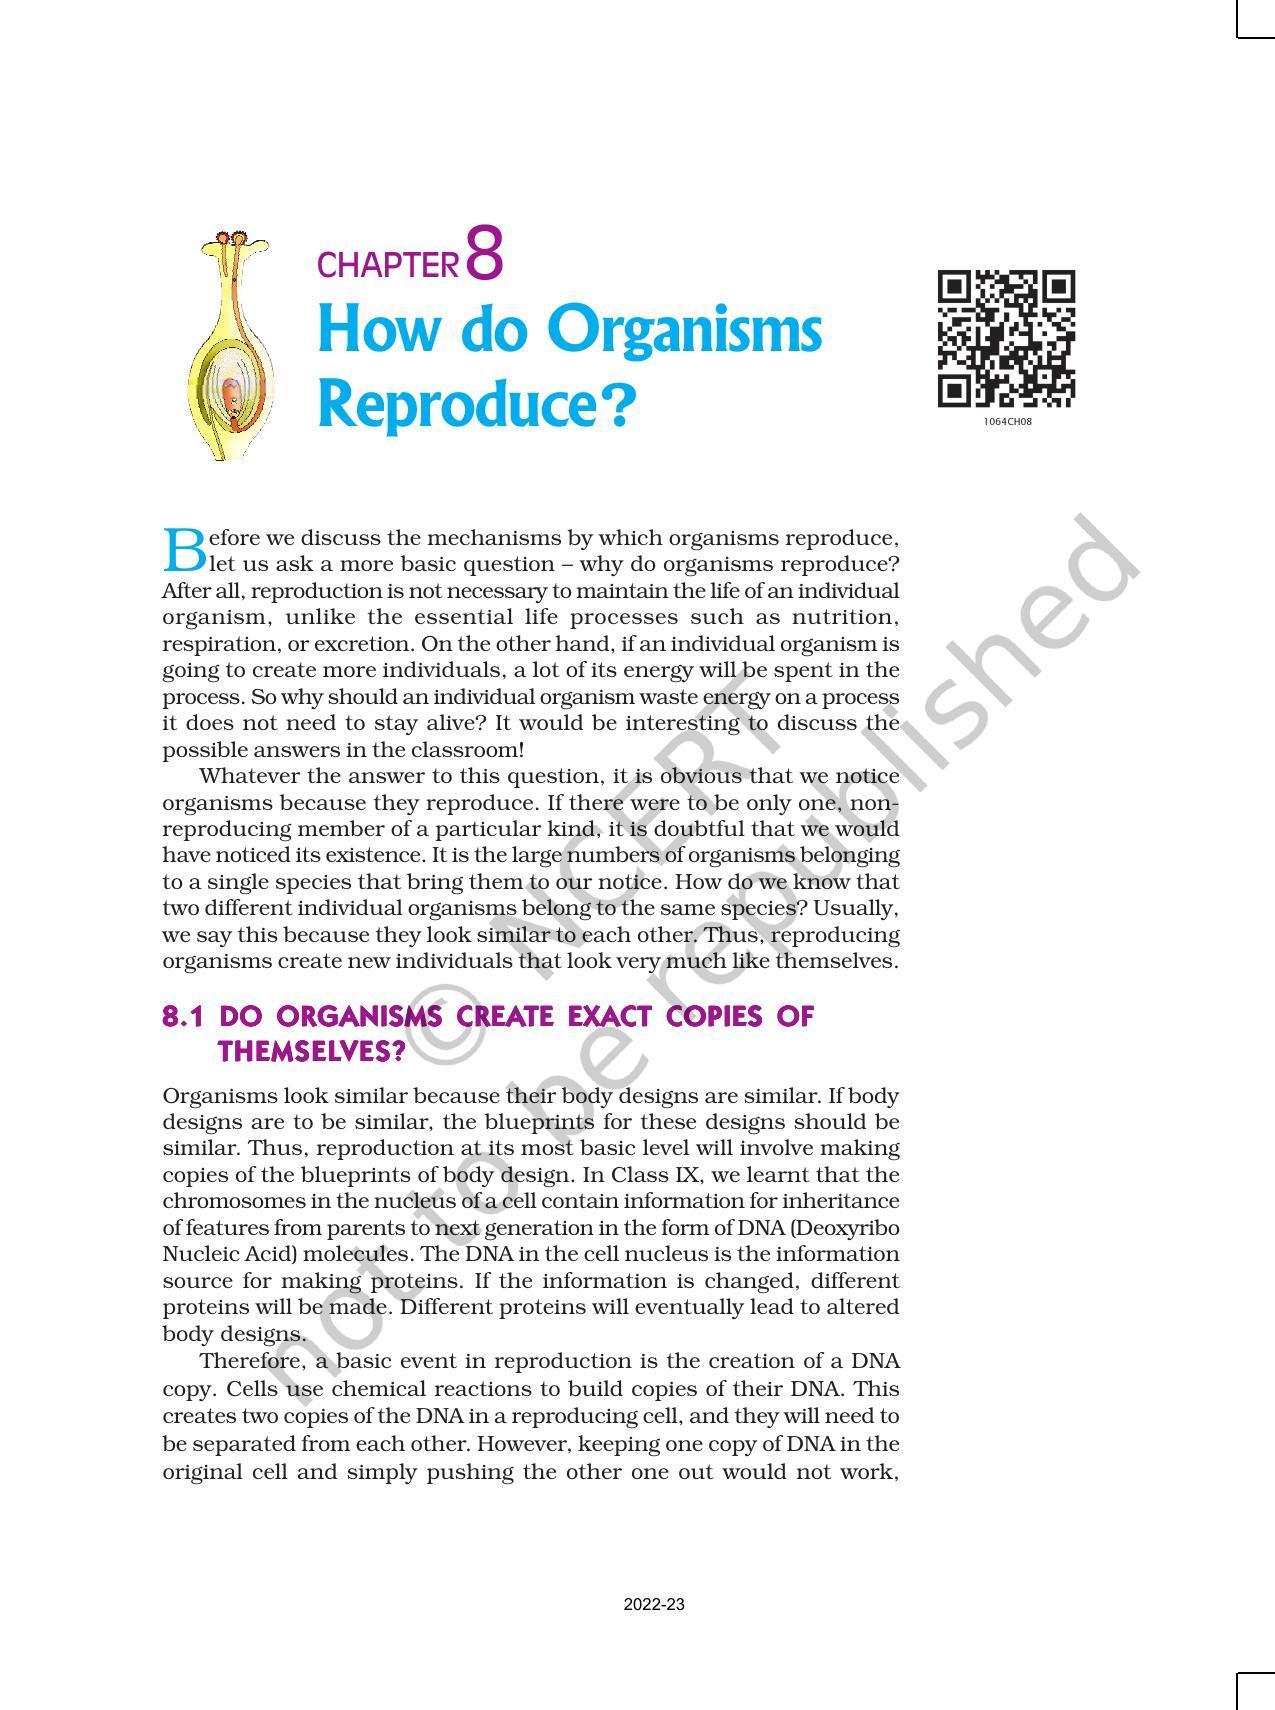 NCERT Book for Class 10 Science Chapter 8 How do Organisms Reproduce? - Page 1